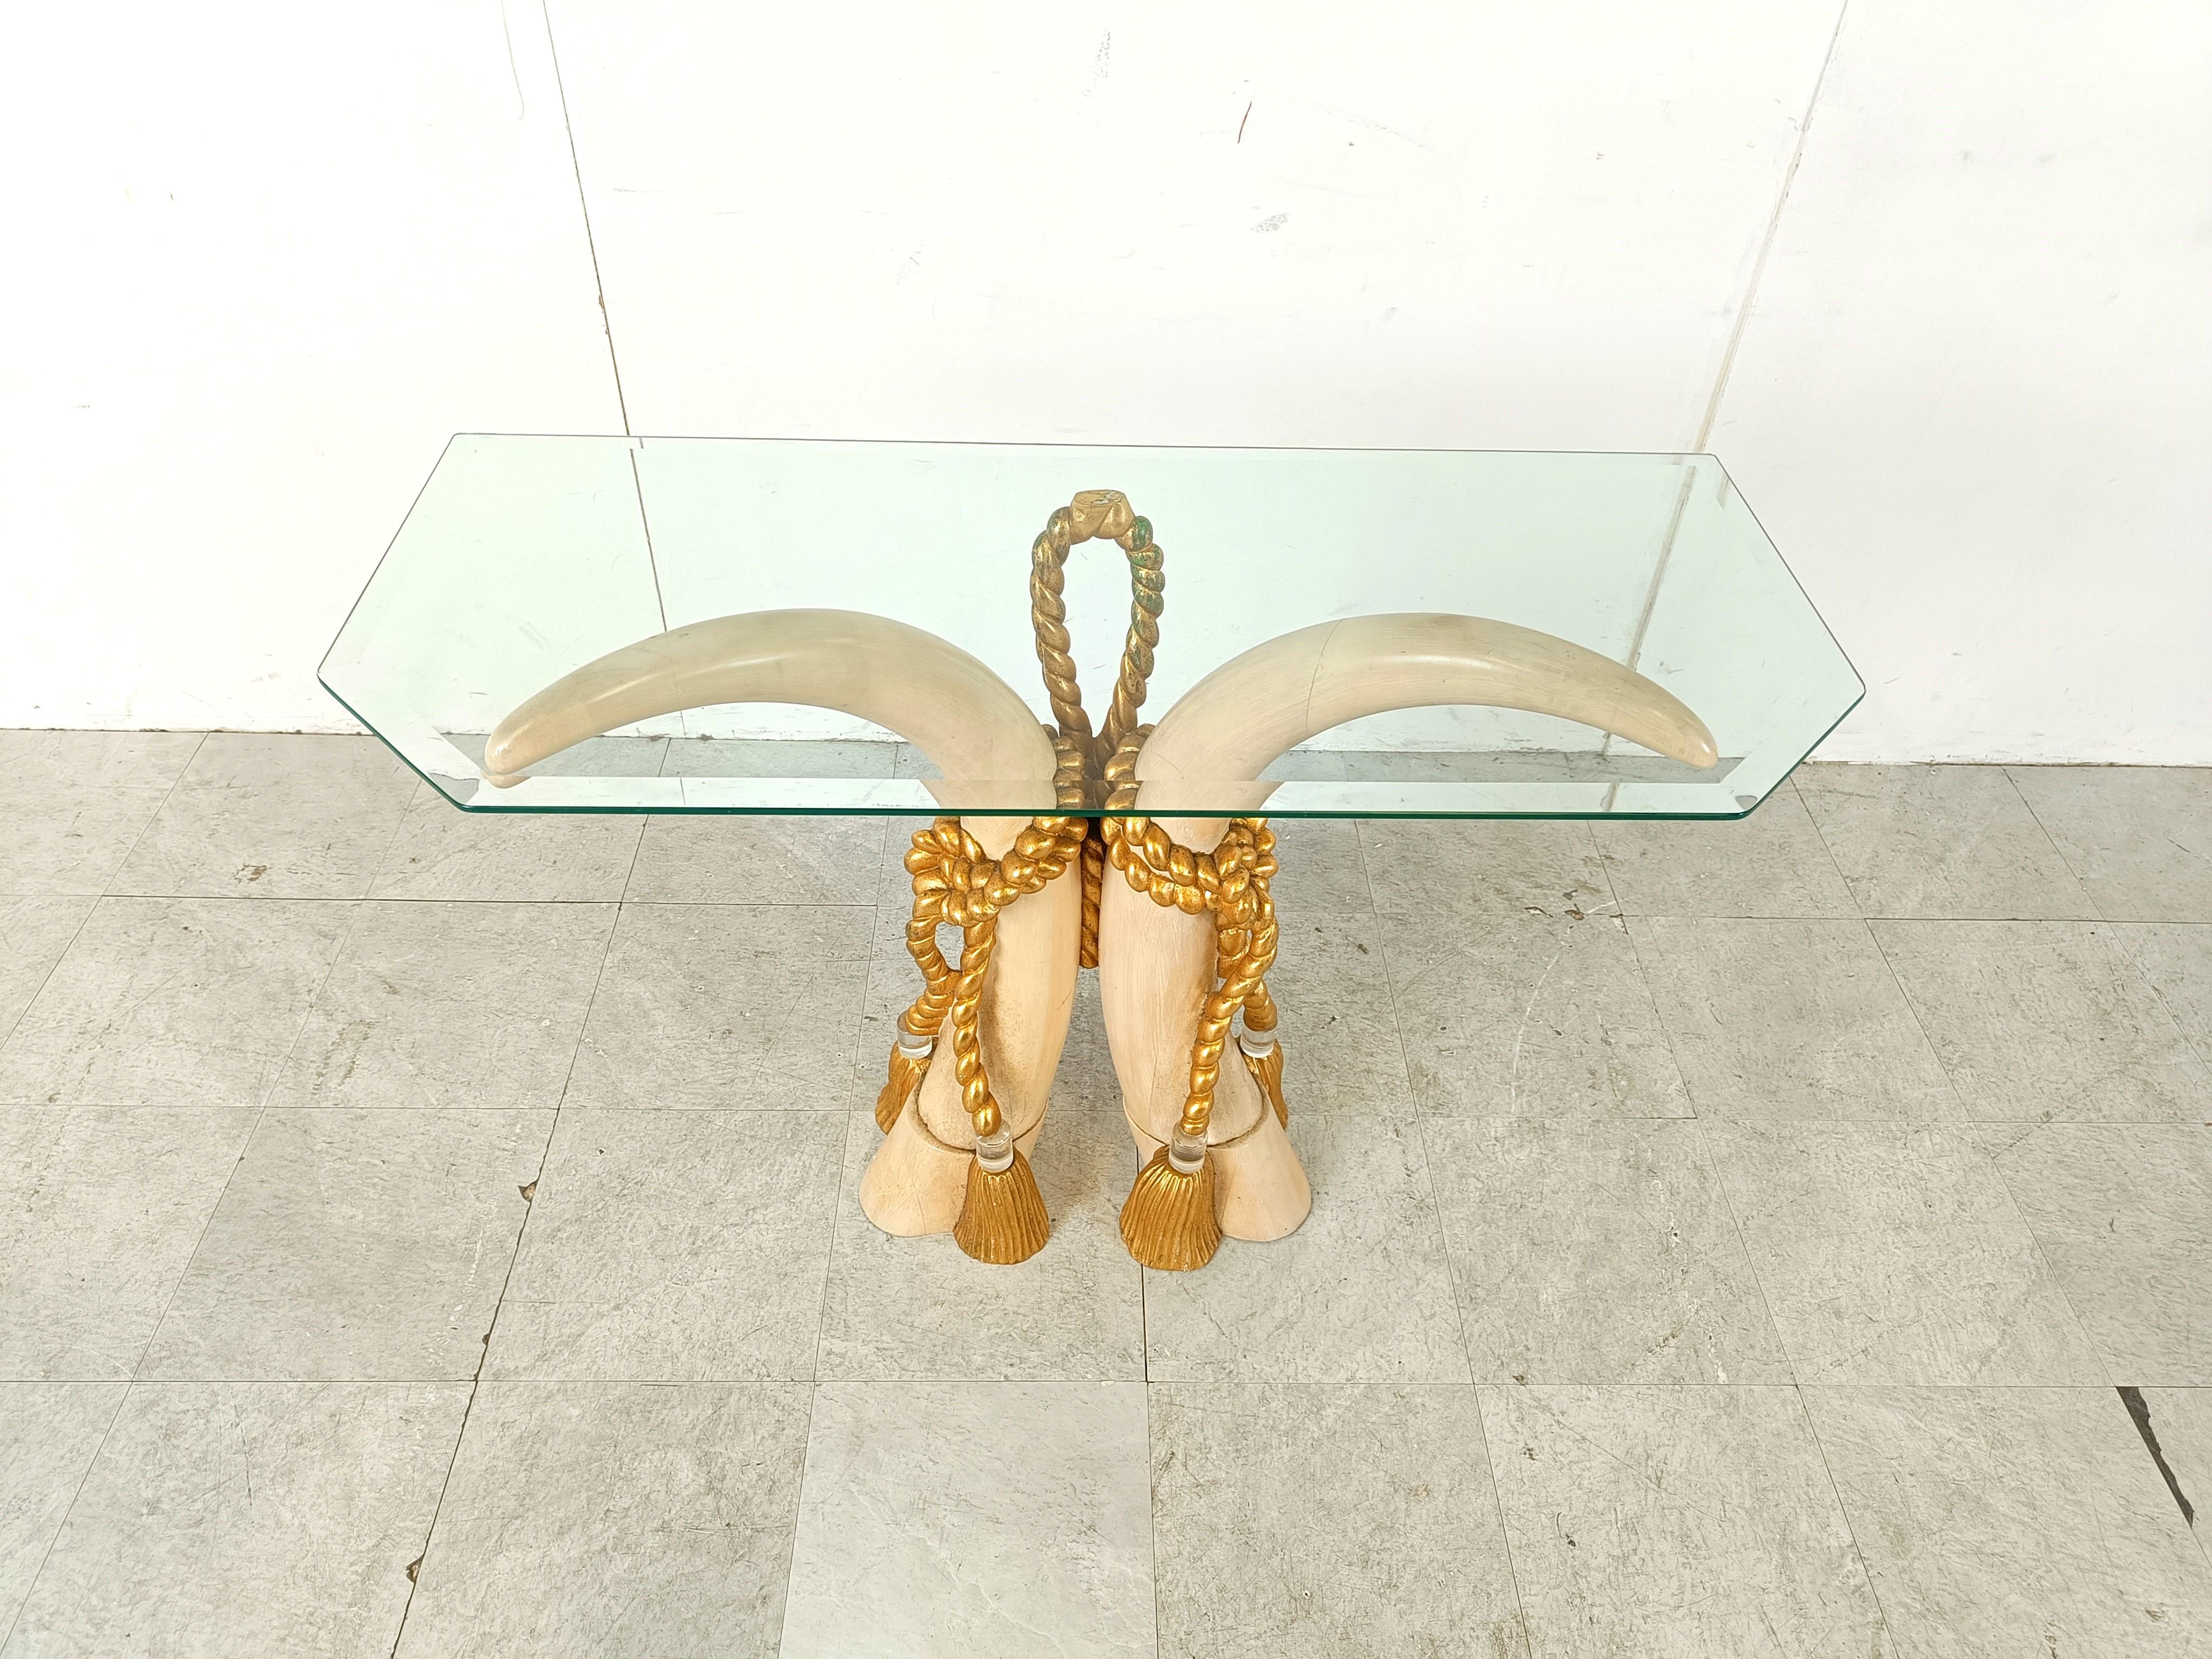 Striking wooden faux tusk console table with a beveled glass top.

Very elegant hollywood regency piece.

Beautifully crafted sculptural base.

1980s - Spain

Good condition

Dimensions:
Height: 75cm/29.52